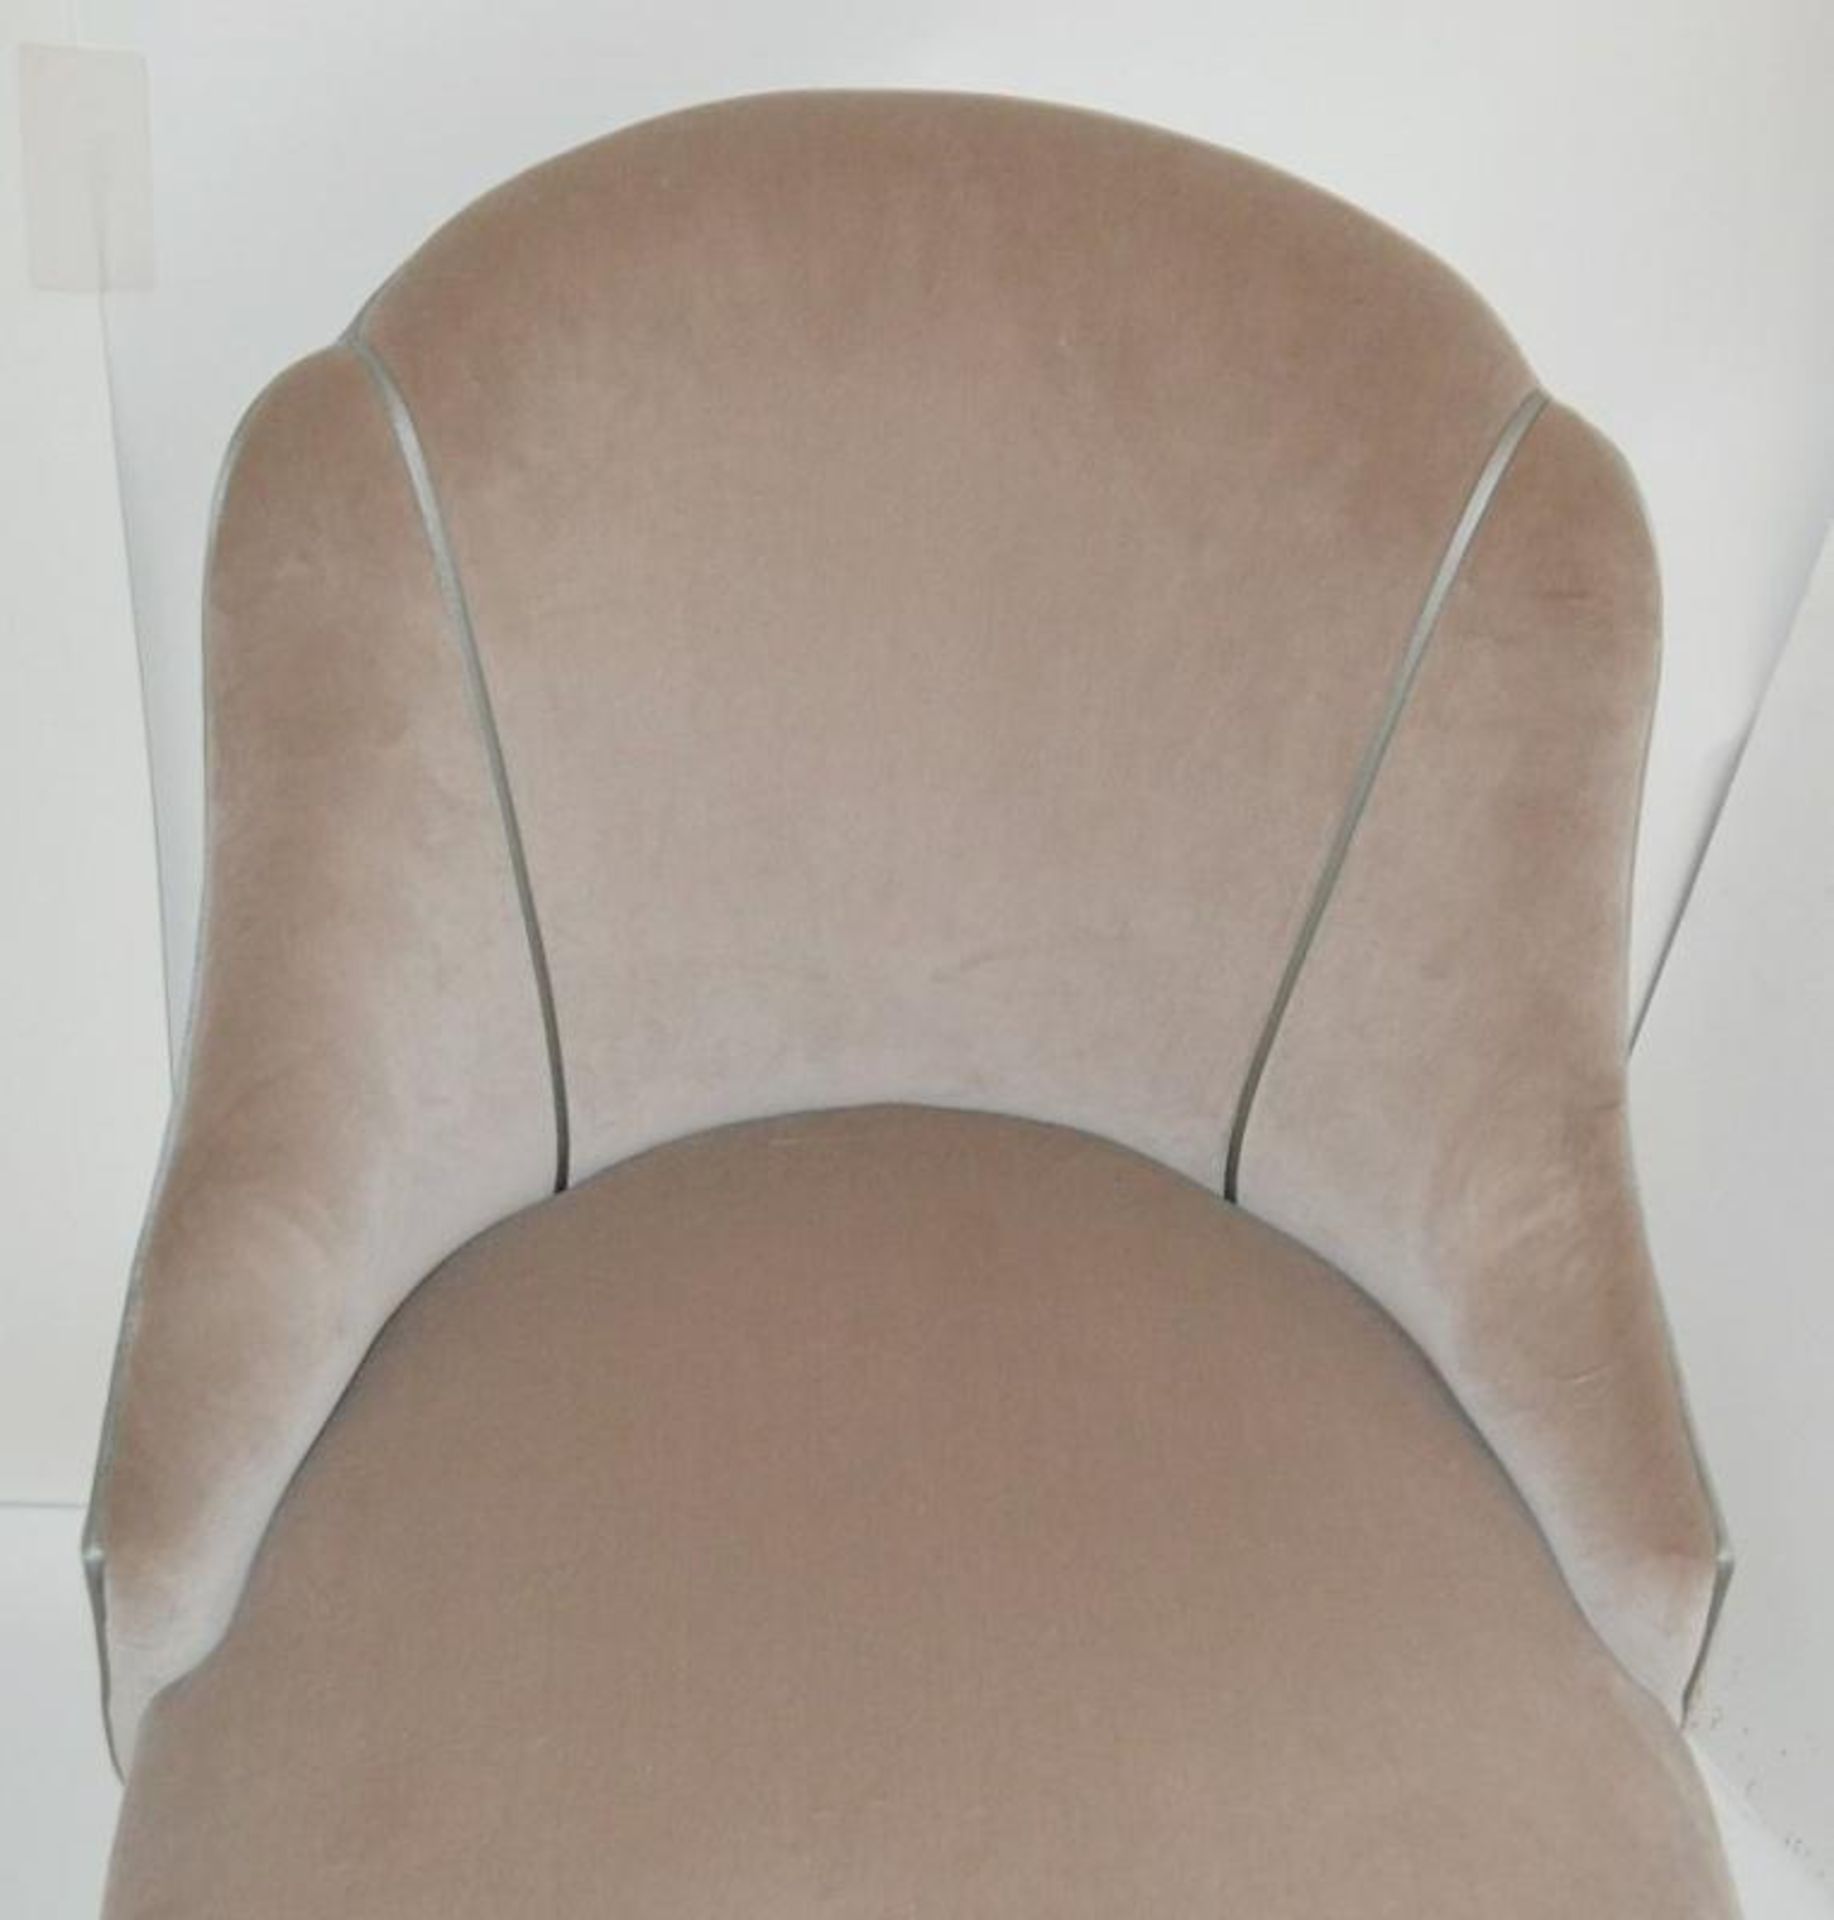 1 x REED &amp; RACKSTRAW "Cloud" Handcrafted Velvet Upholstered Chair - Dimensions: H87 x W58 x D5 - Image 5 of 14